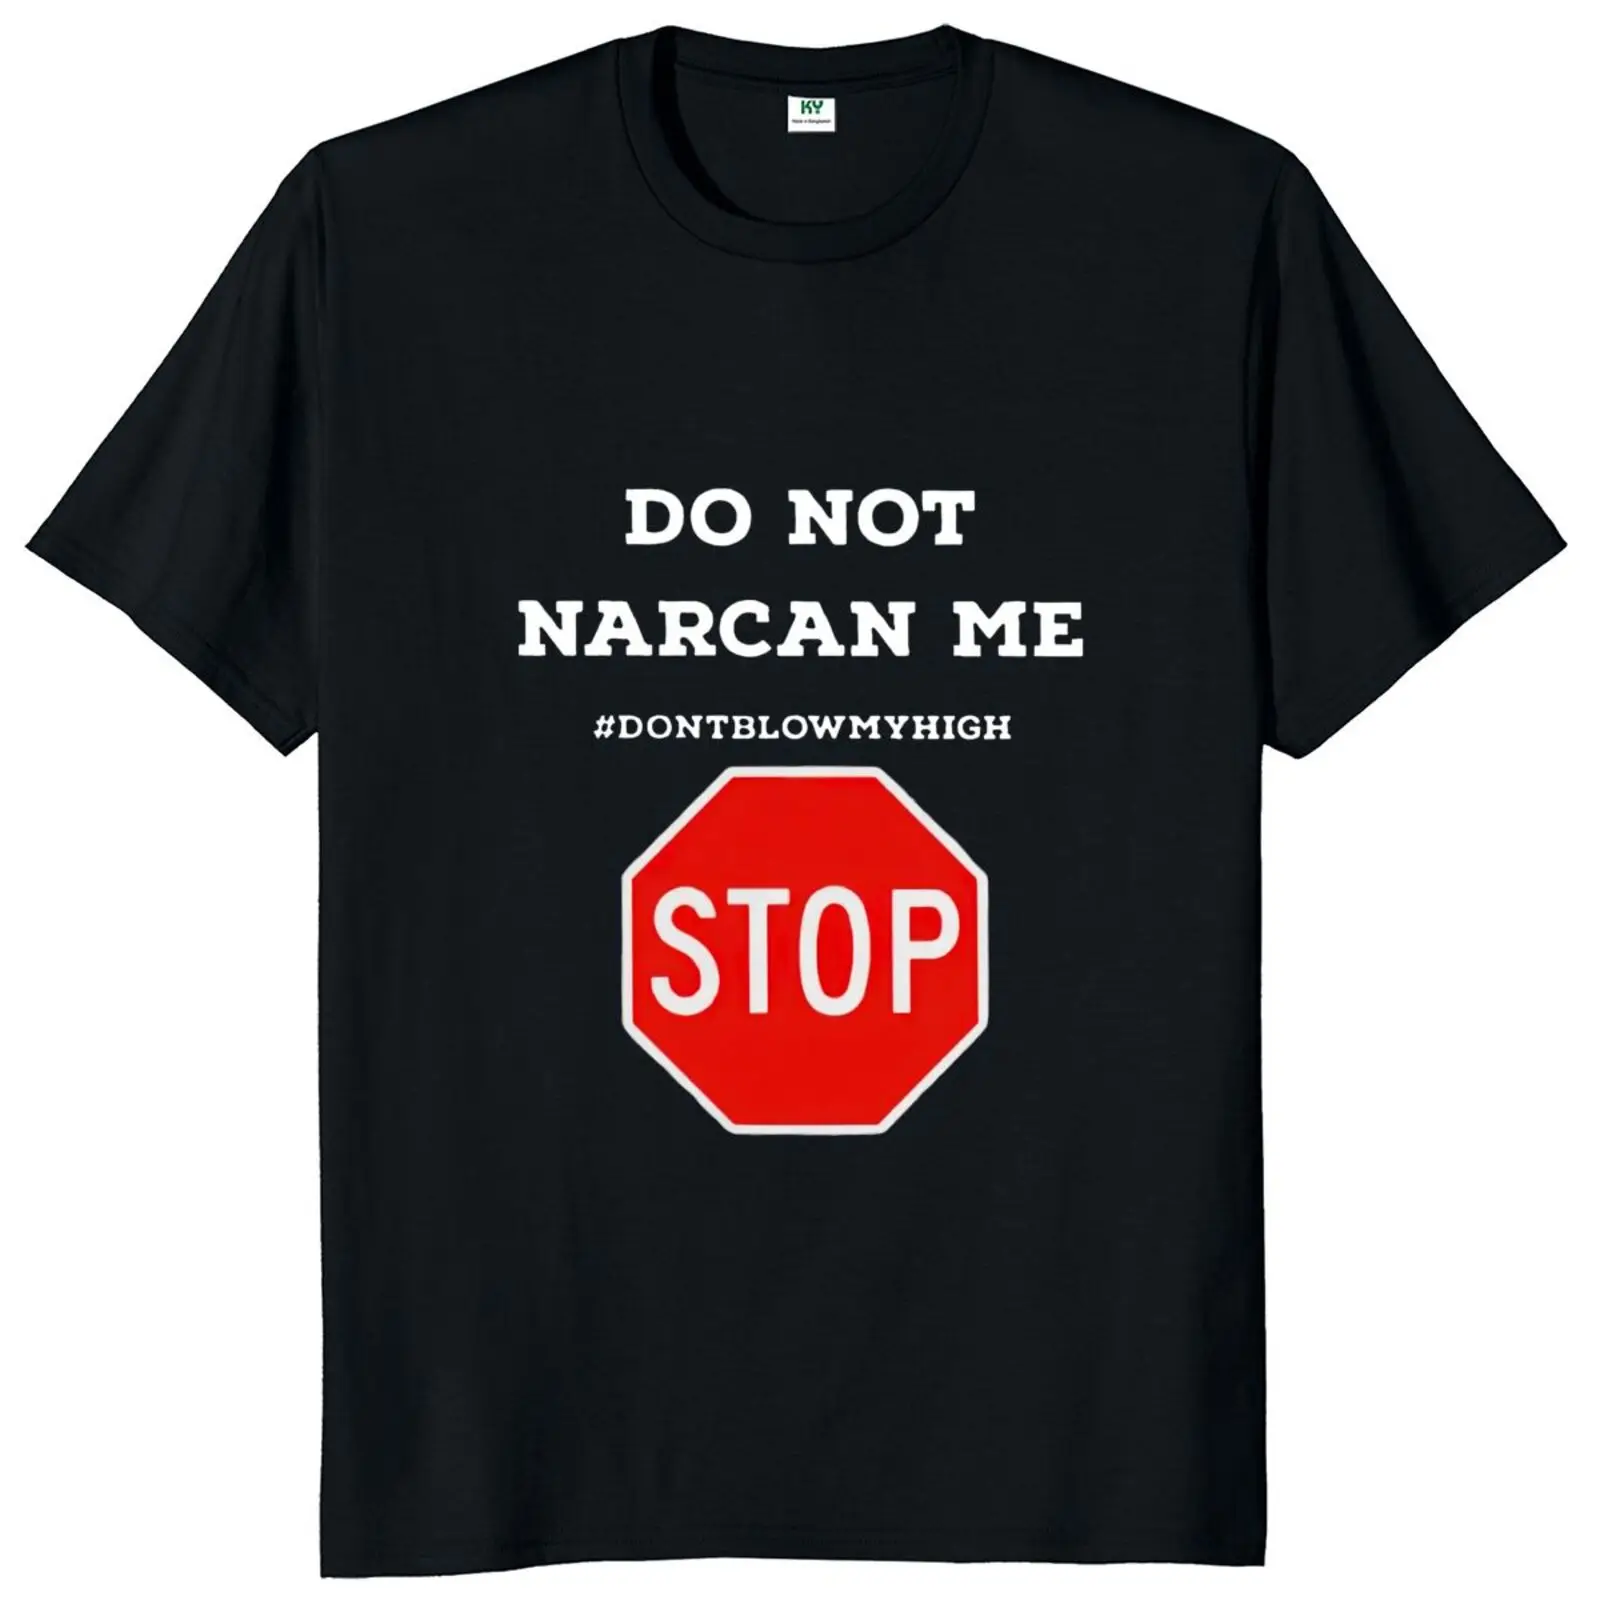 

Do Not Marcan Me Stop T-shirt Funny Sayings Adult Humor Jokes Tee Tops 100% Cotton Unisex Casual Soft Tshirts EU Size